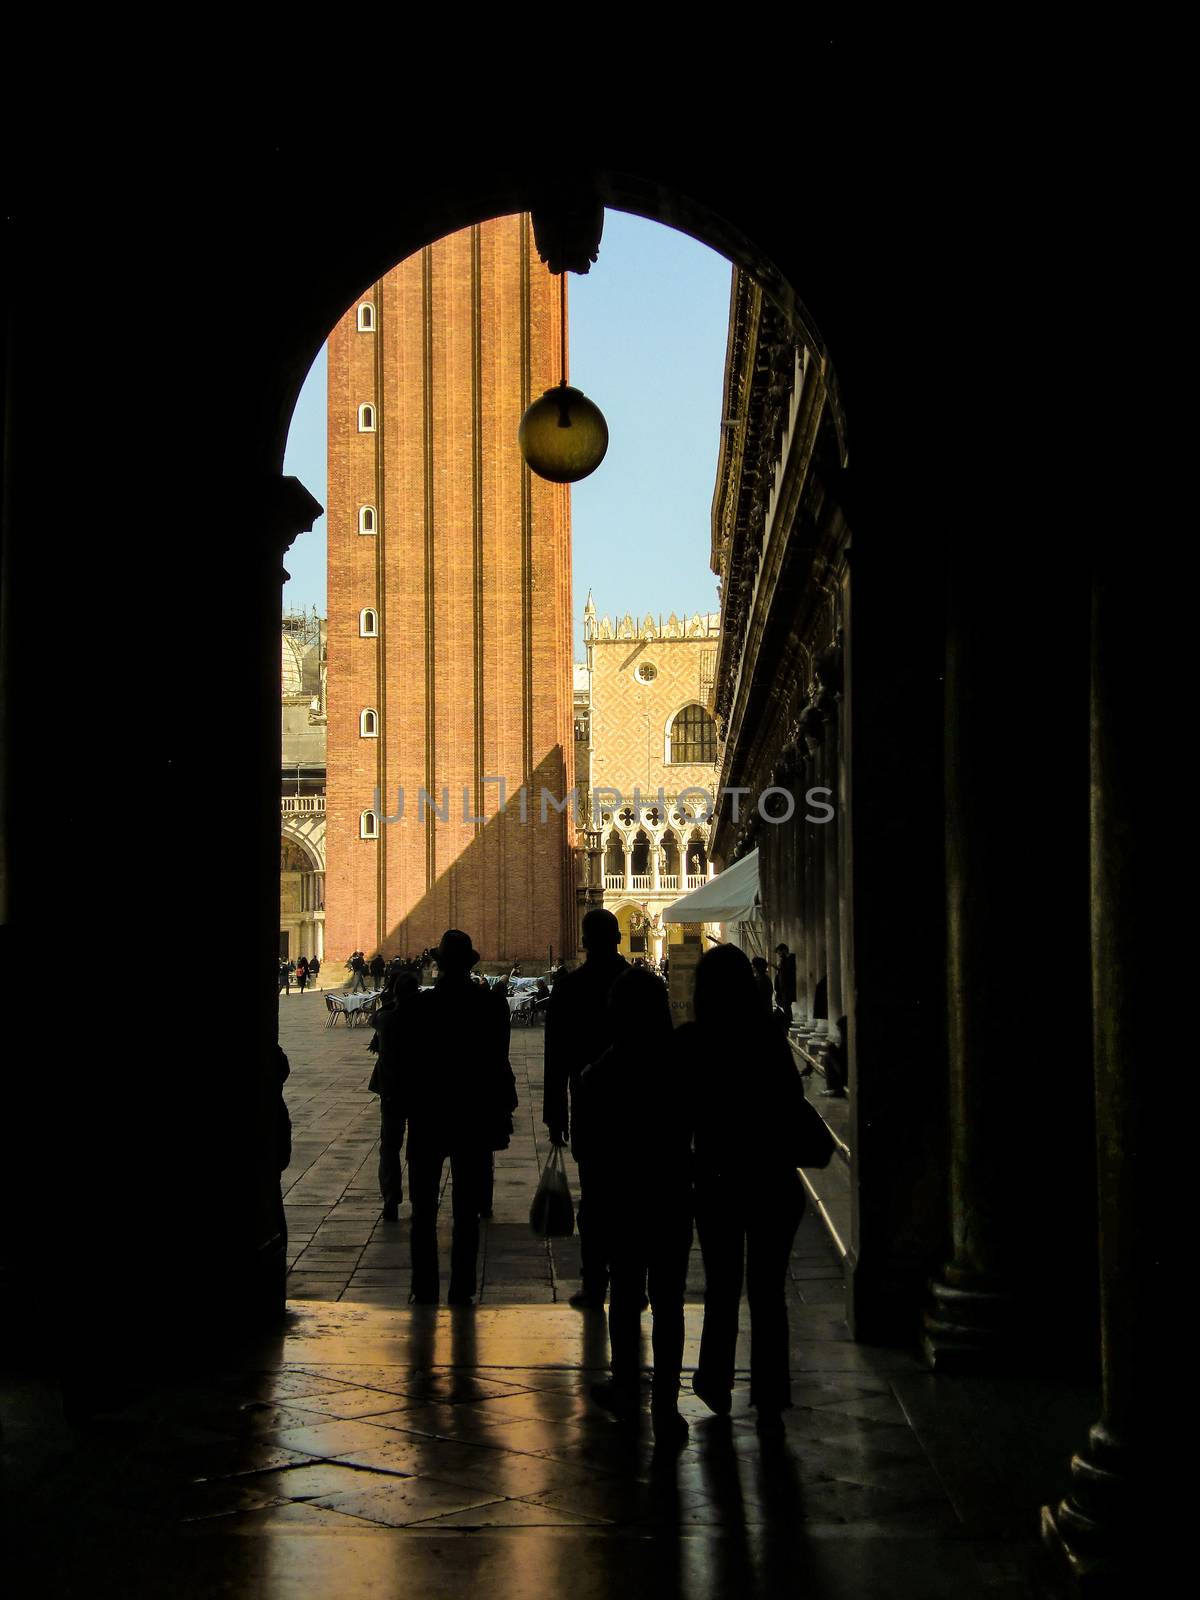 Arch or door in deep shadow behind Saint Mark square in Venice with tourists in shadow and shadow passing through.